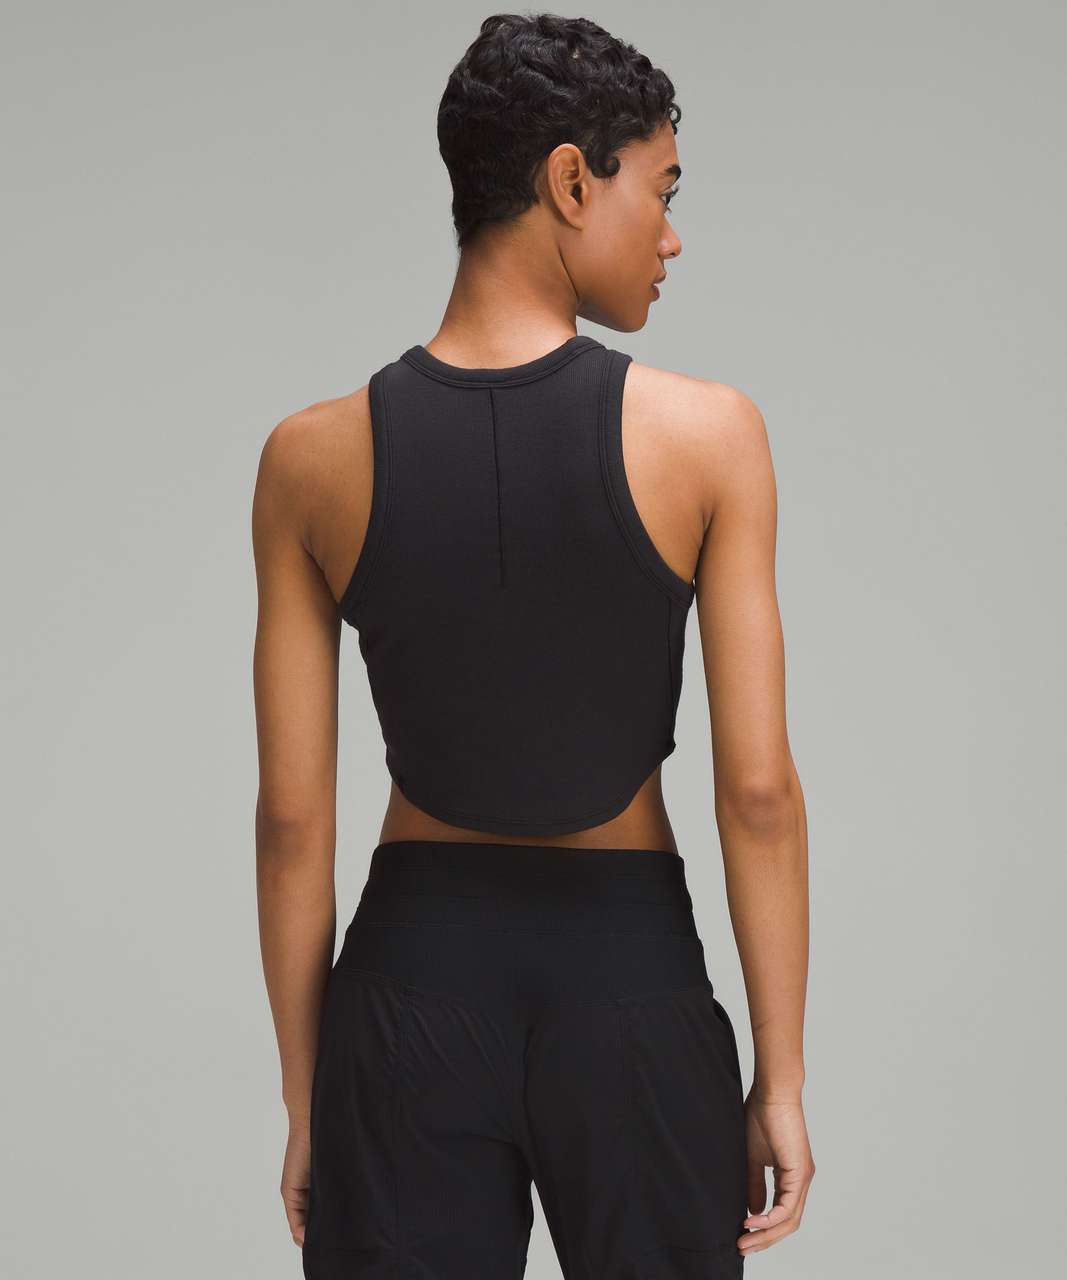 Lululemon Hold Tight Cropped Tank Top - Black